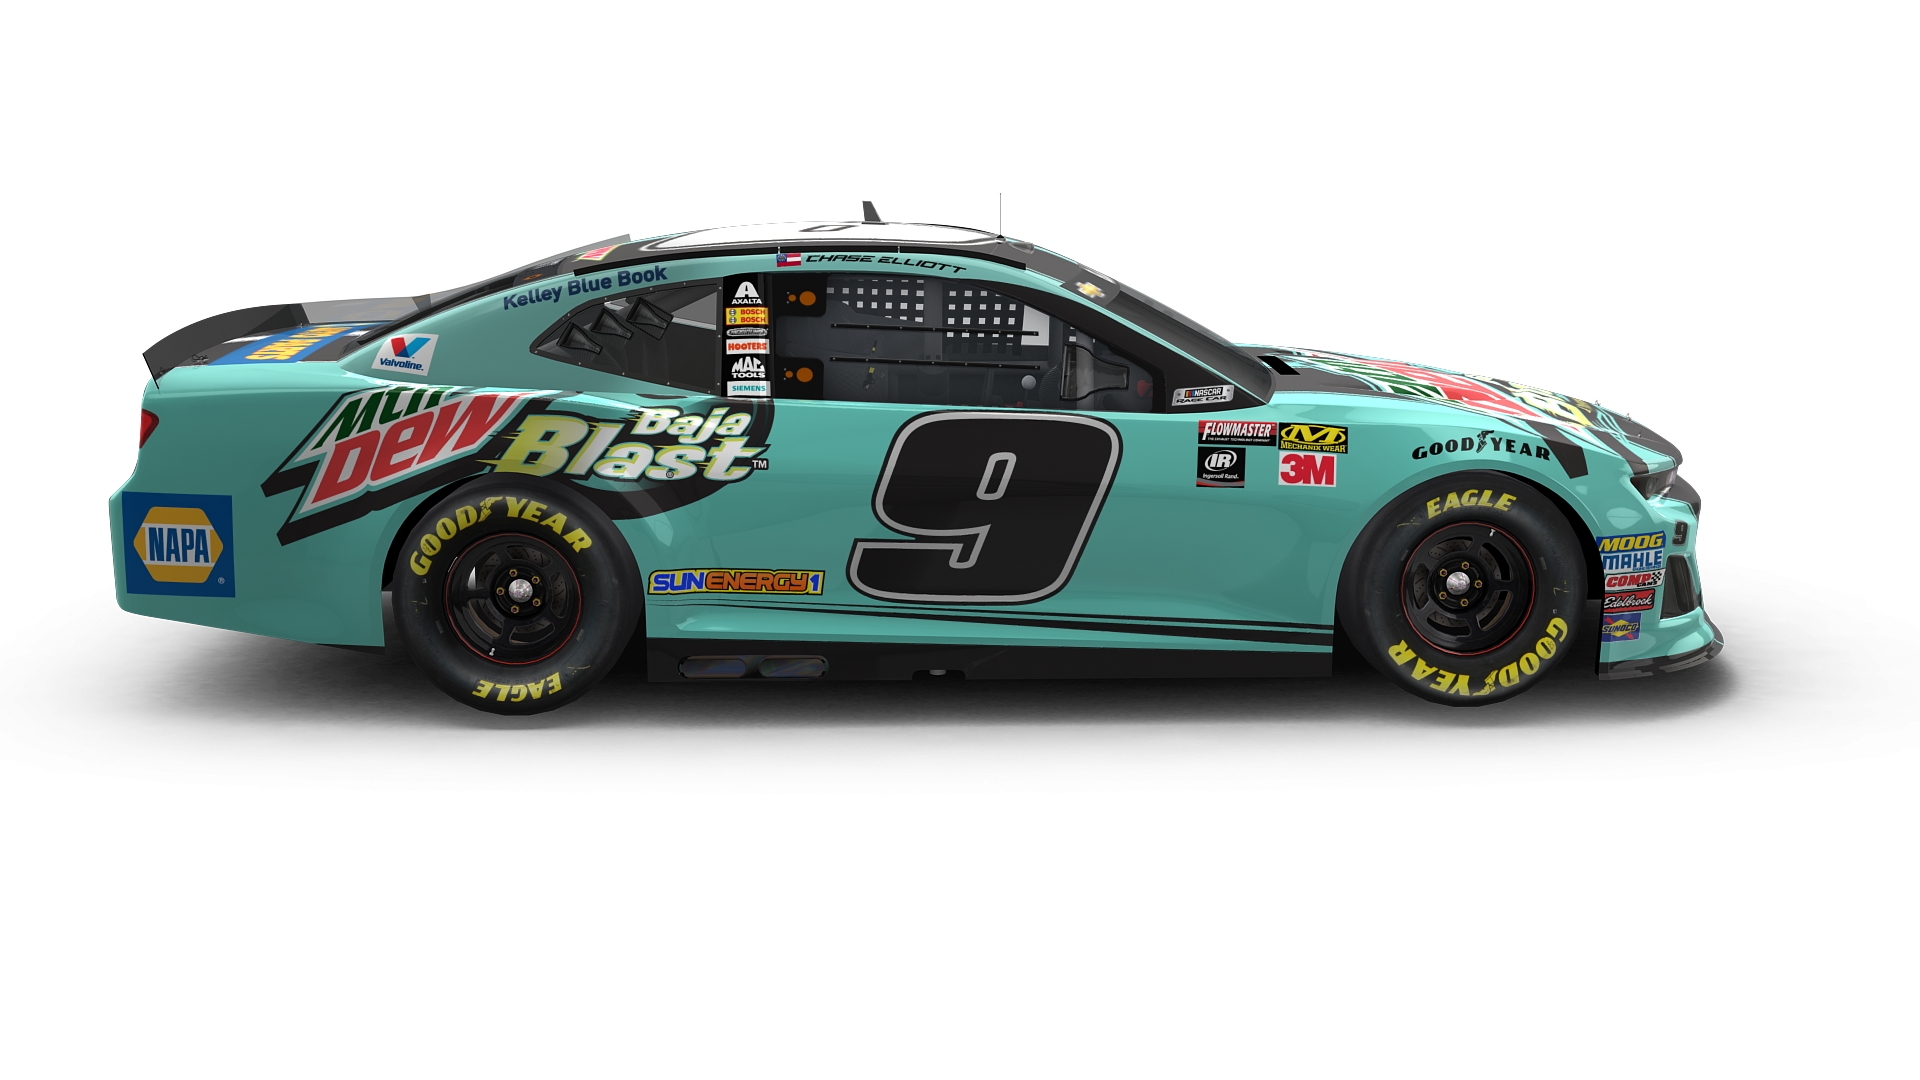 Exclusive Heres A First Look At The 9 Mtn Dew Baja Blast Car That